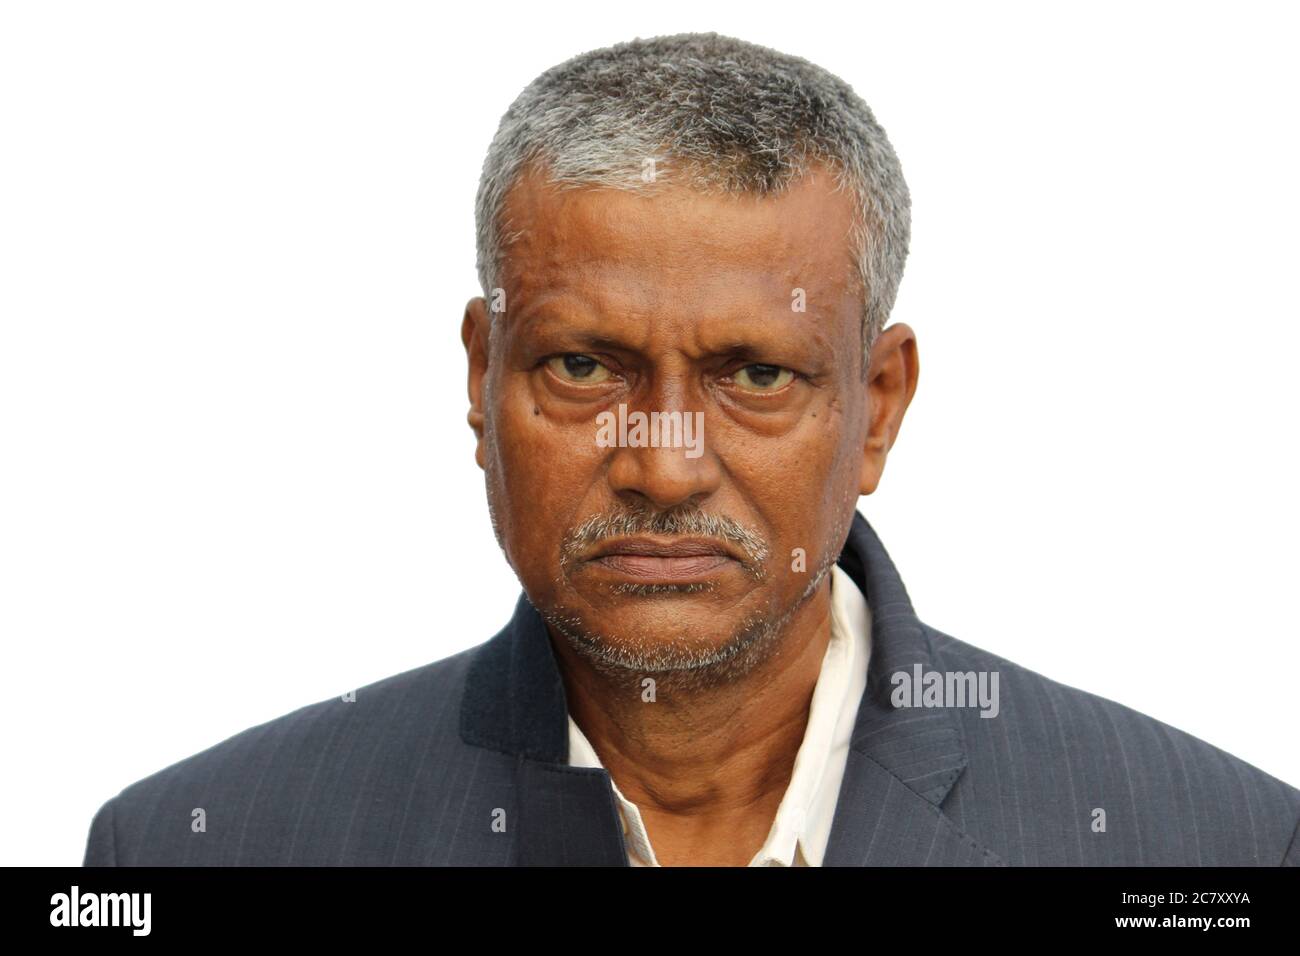 Angry, sad or worried looking senior Indian man face portrait on white background. Stock Photo